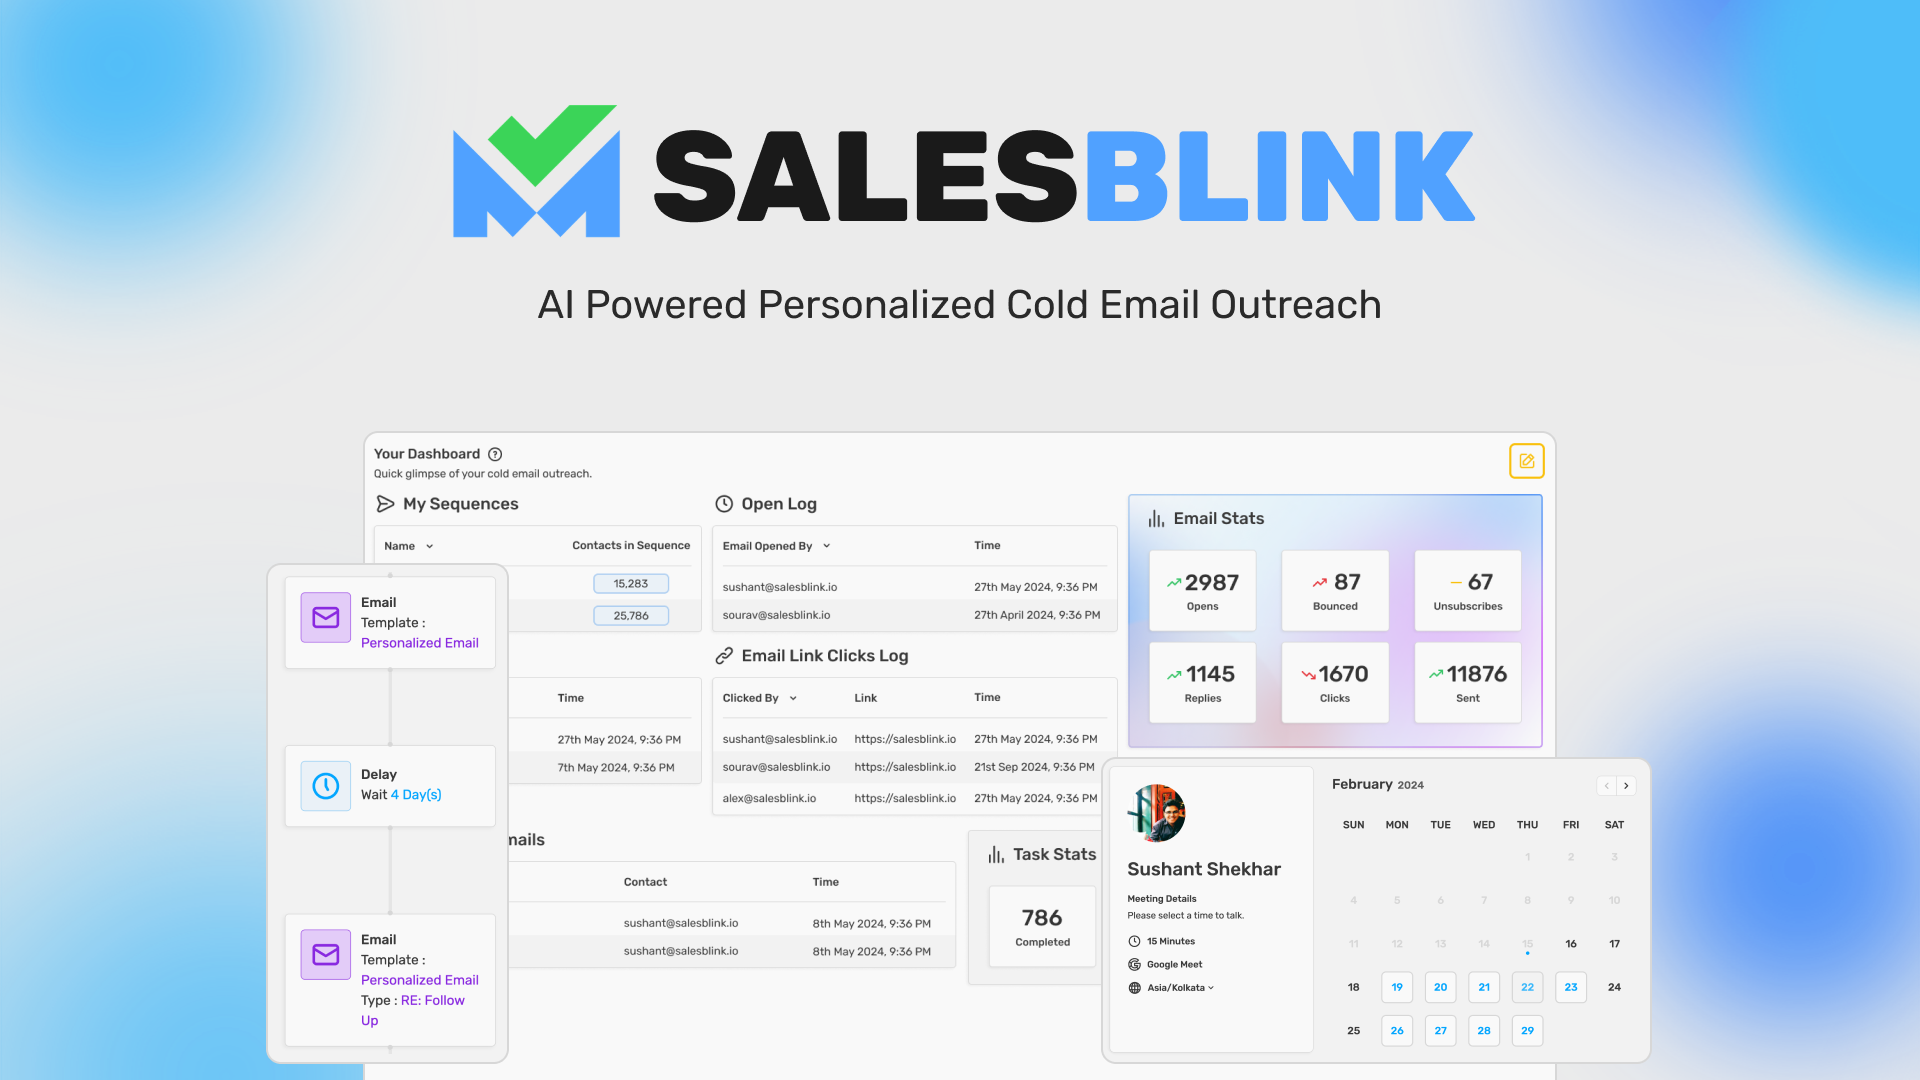 An AI Powered Personalized Cold Email Outreach tool